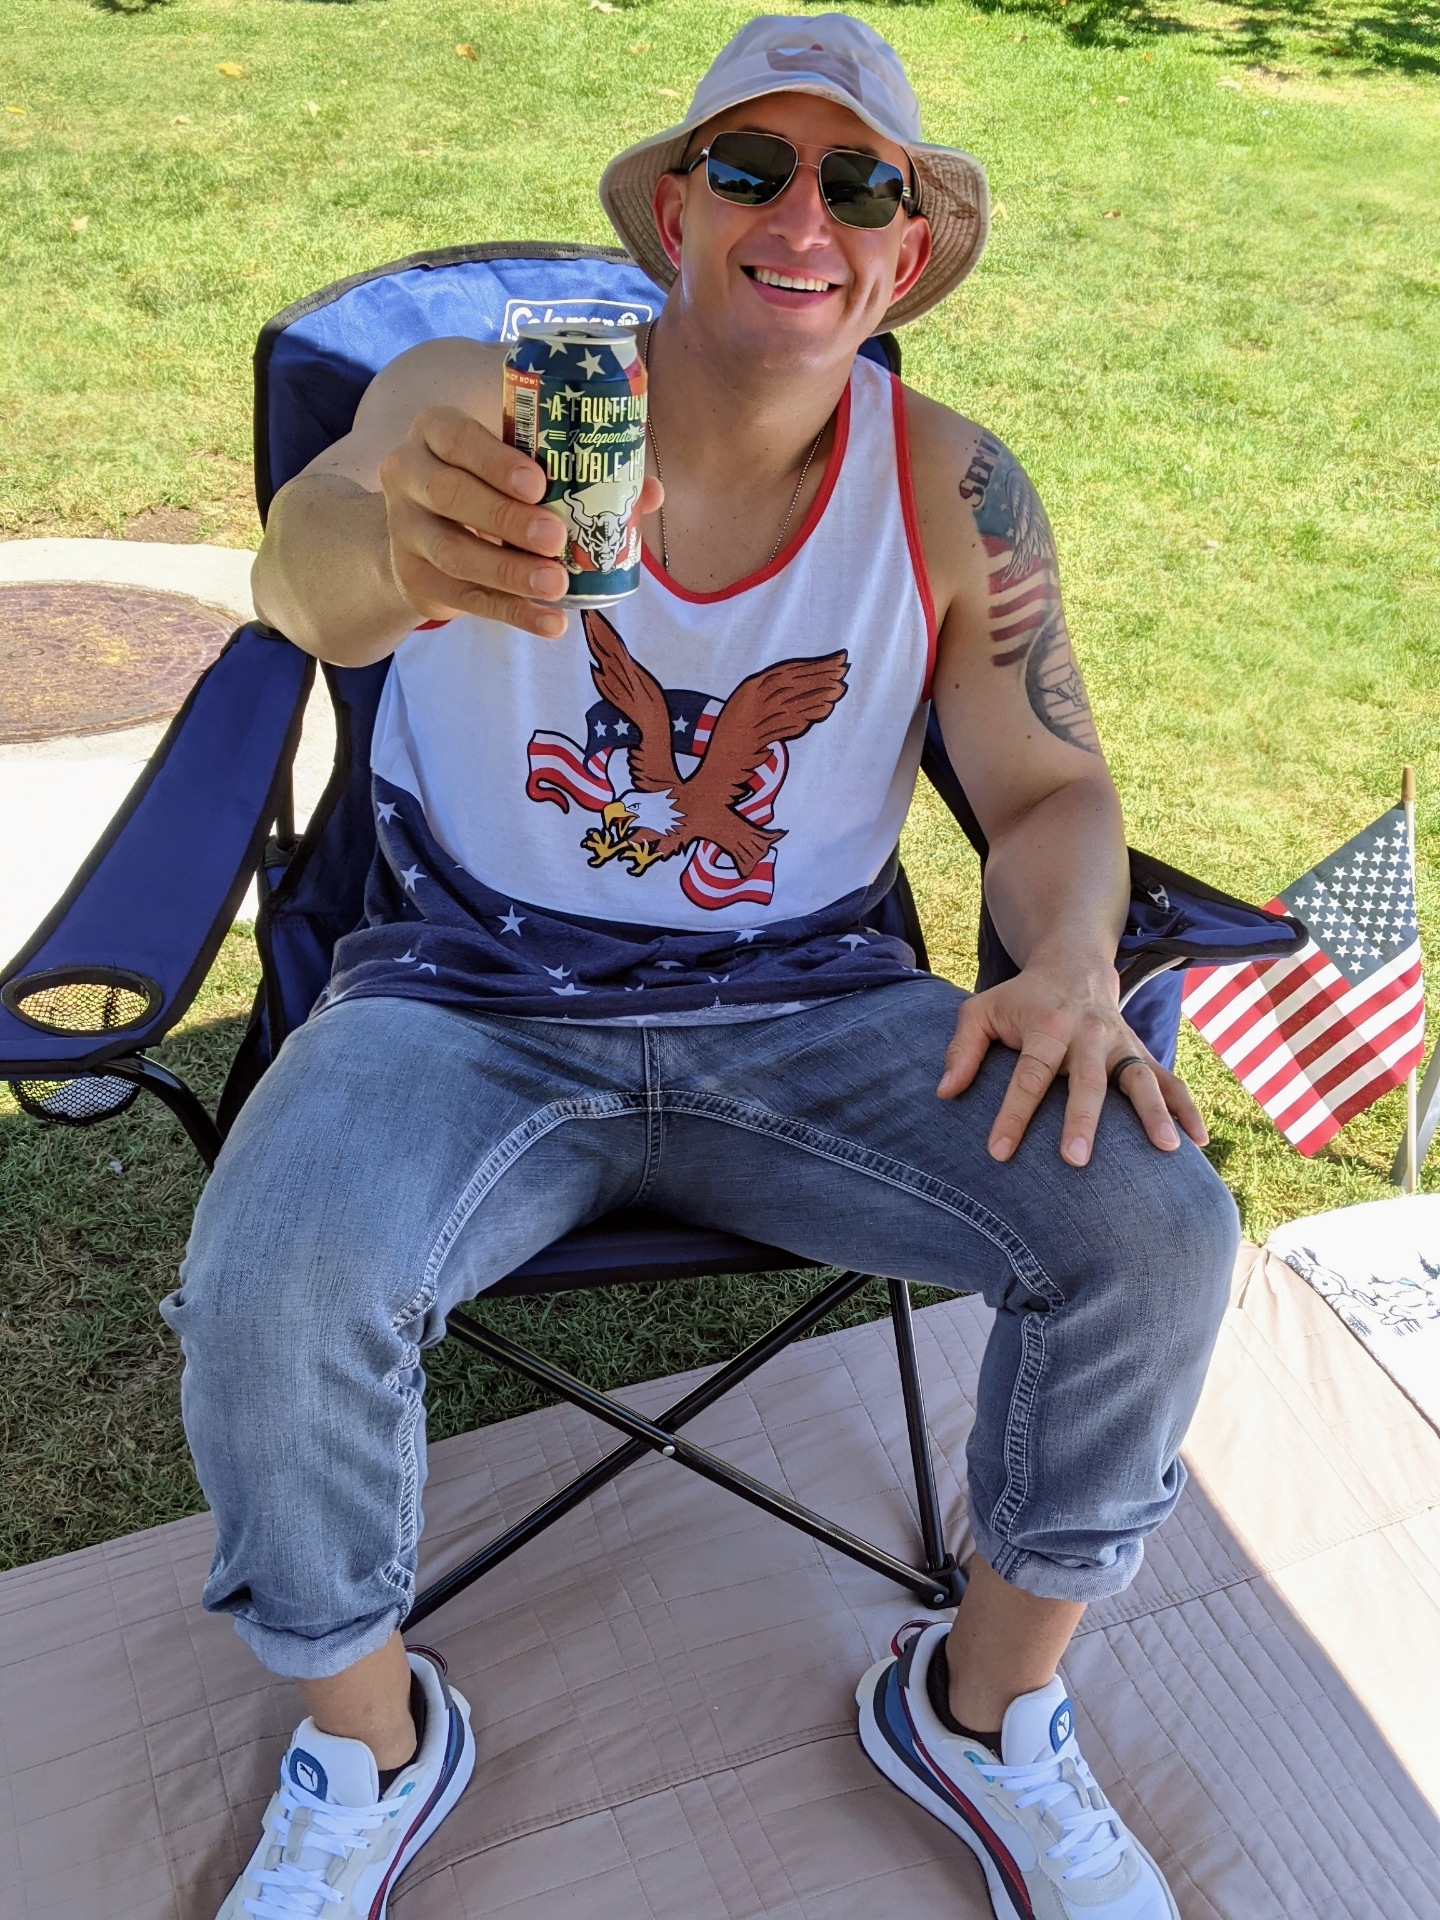 Marine Miguel drinking a beer celebrating the 4th of July at the park wearing red, white & blue